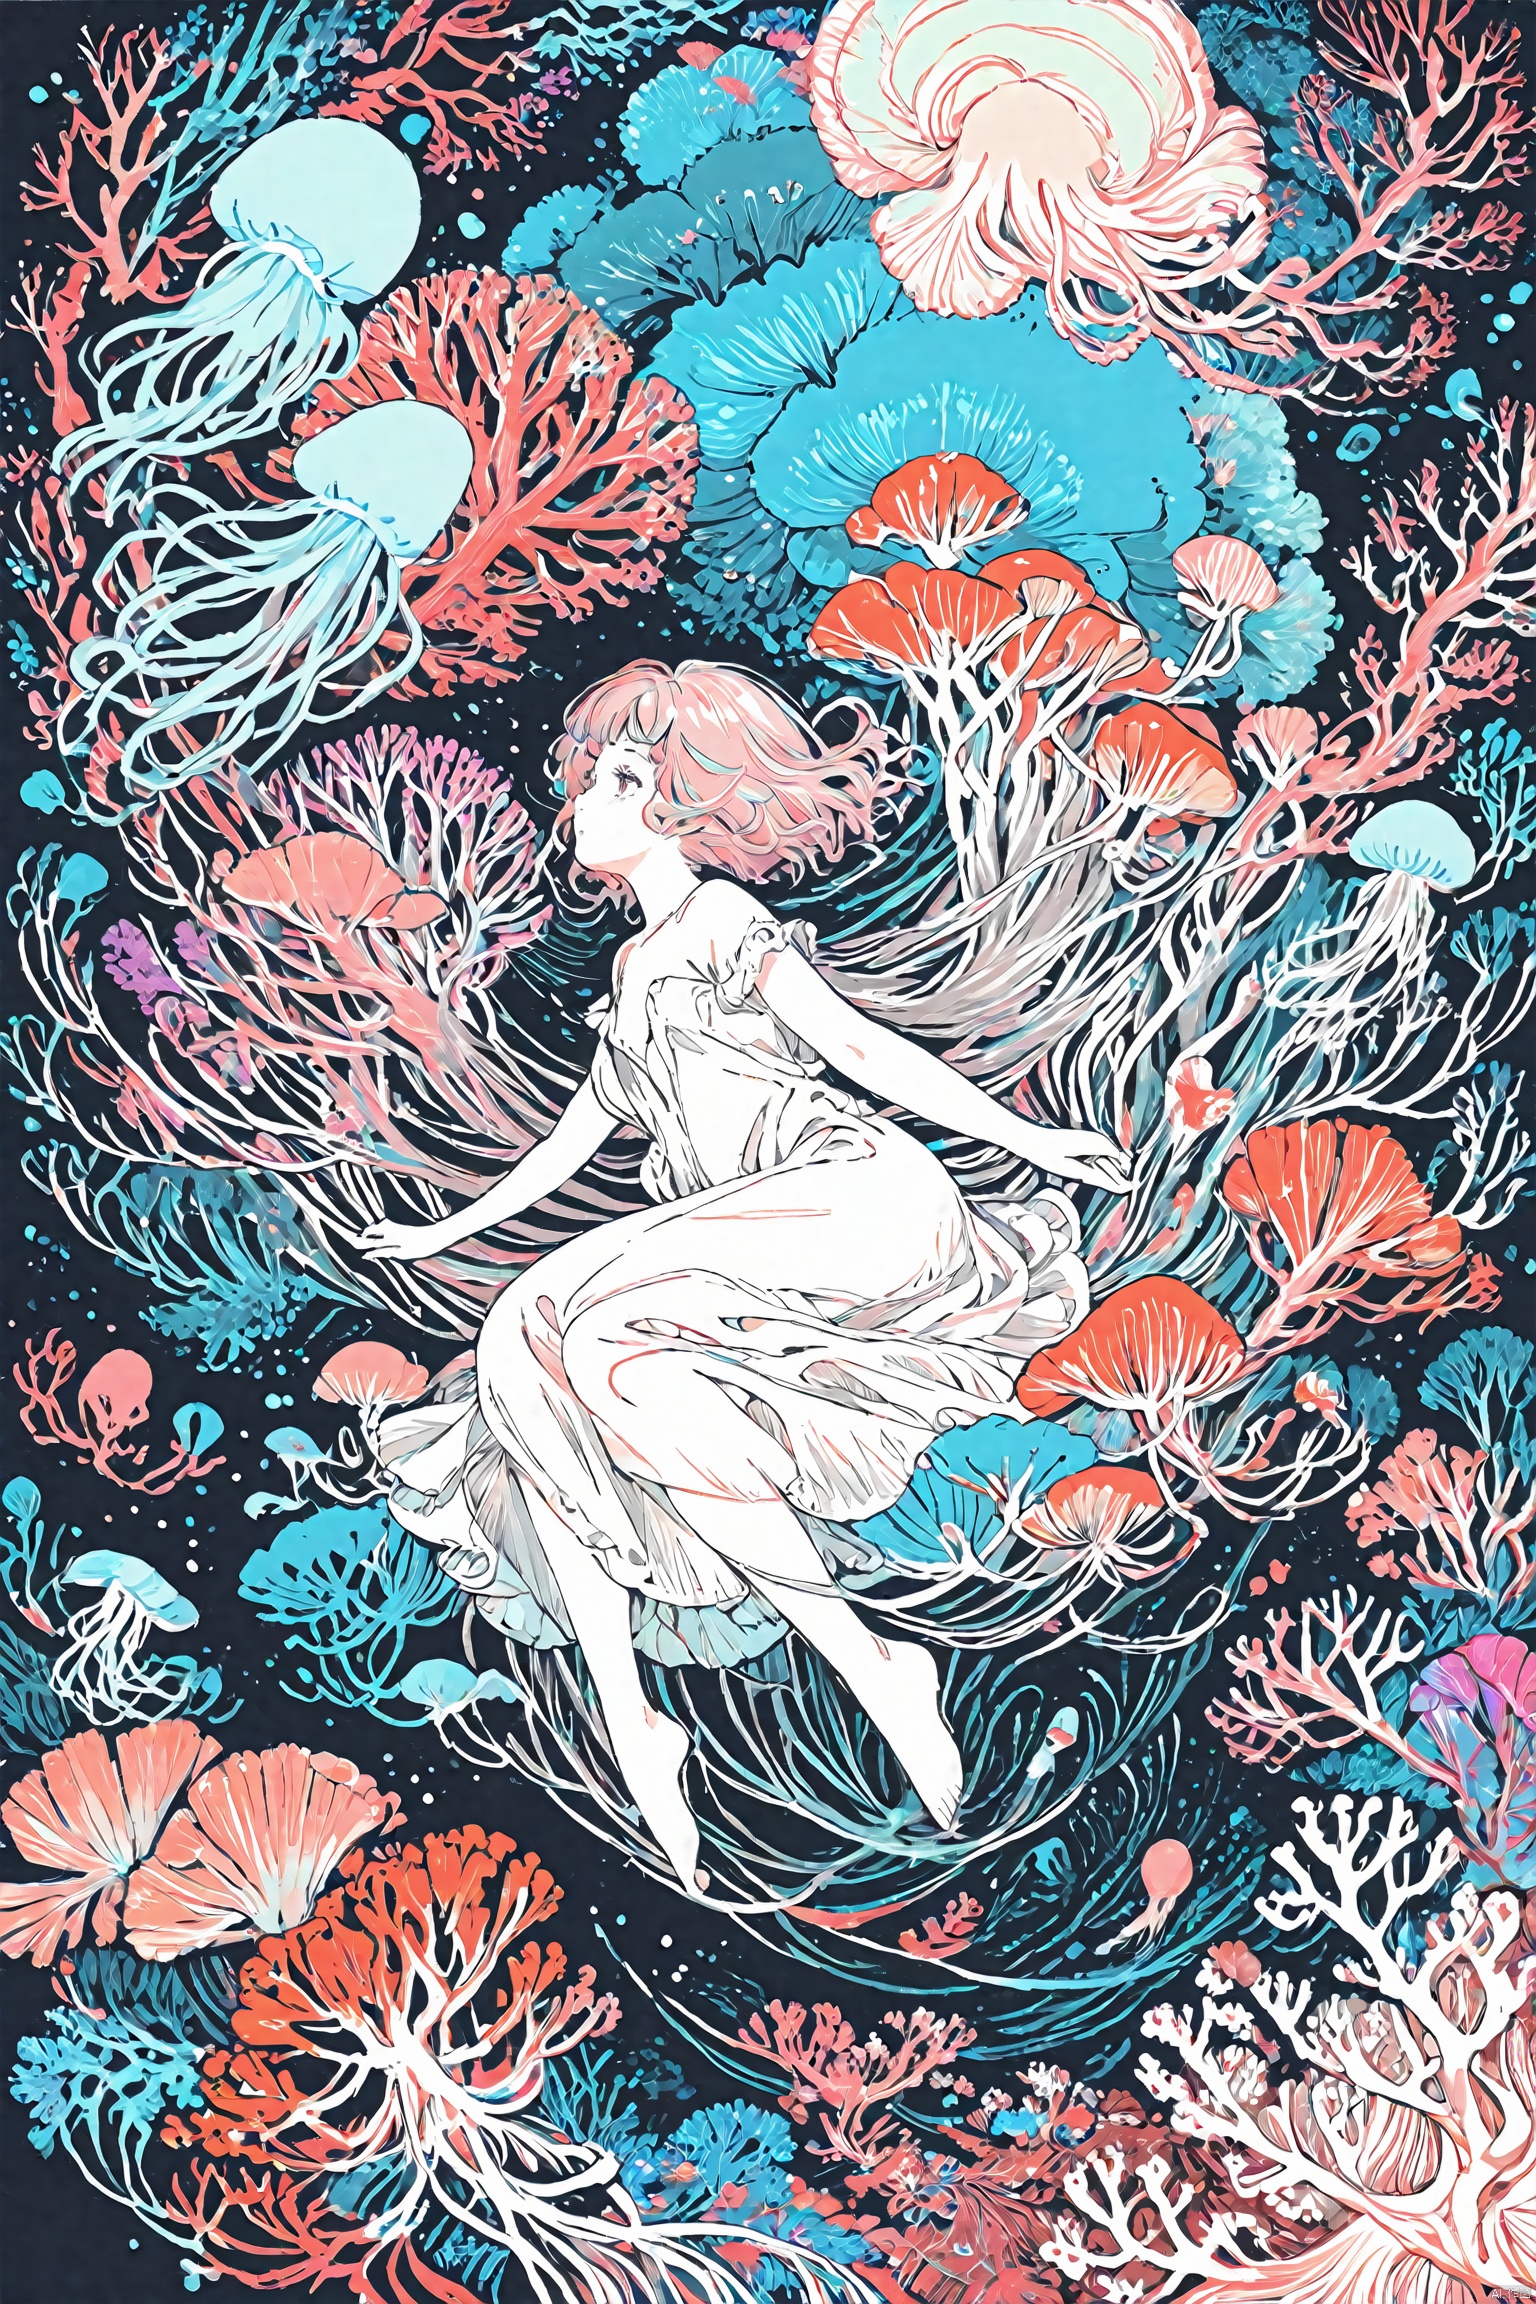  line art,line style,A young girl, exquisite and beautiful, with deep-sea fish and various colors of coral and jellyfish, sea anemones, corals, psychedelic, various marine creatures, bright color combinations, fantasy7033, sangonomiyakokom, waterM, line art